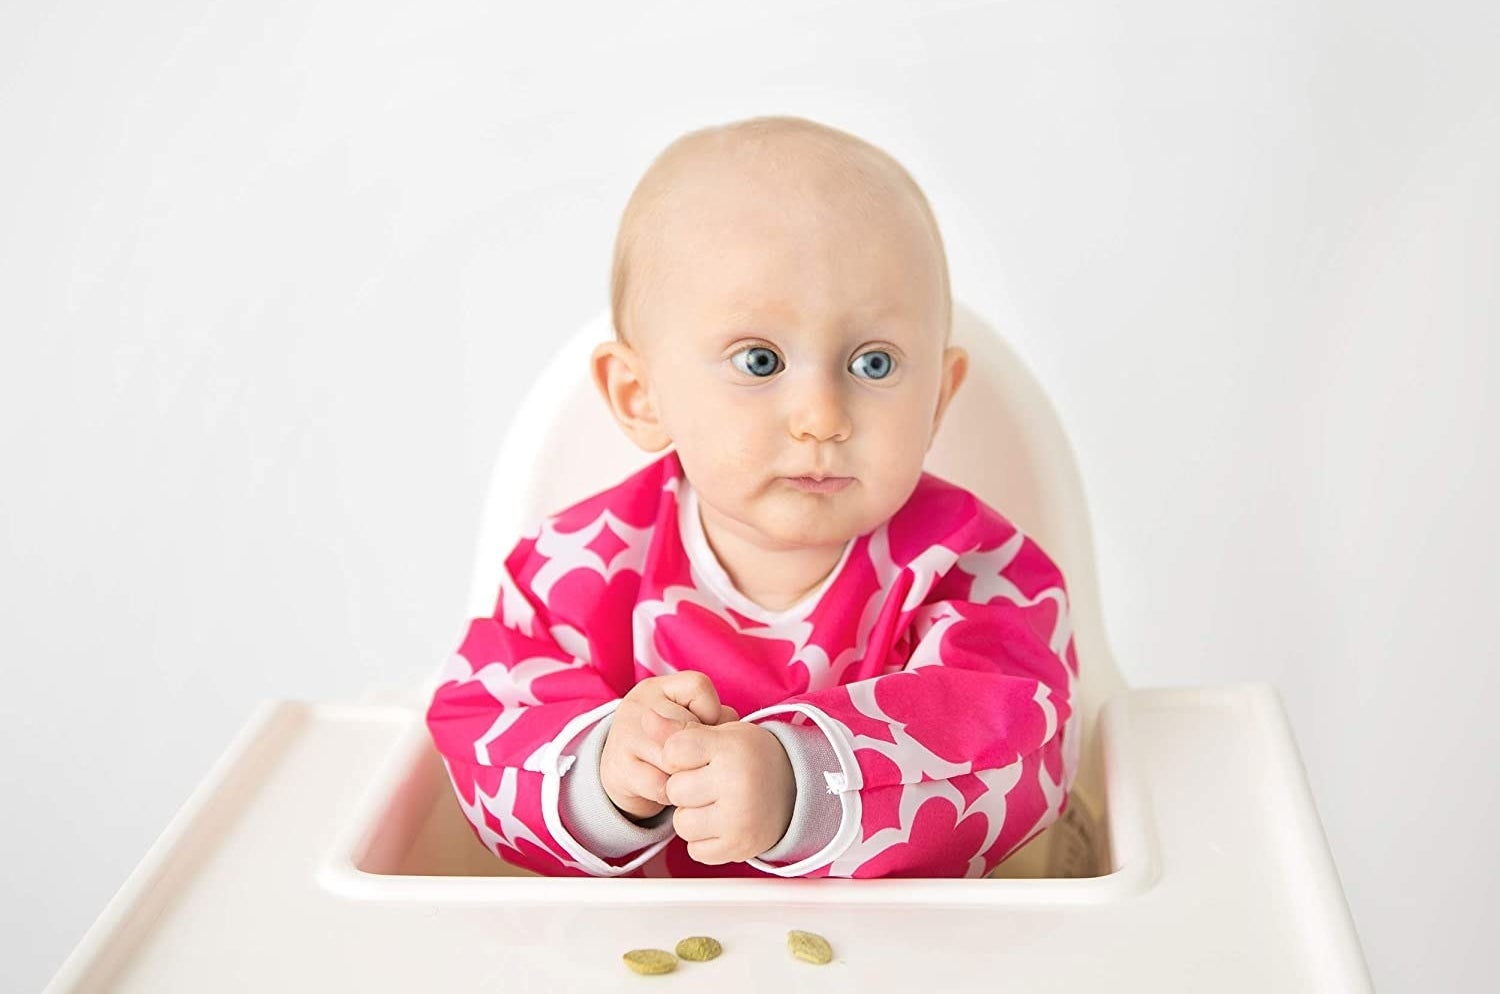 A baby sitting in a high chair with a bib on The bib has long sleeves